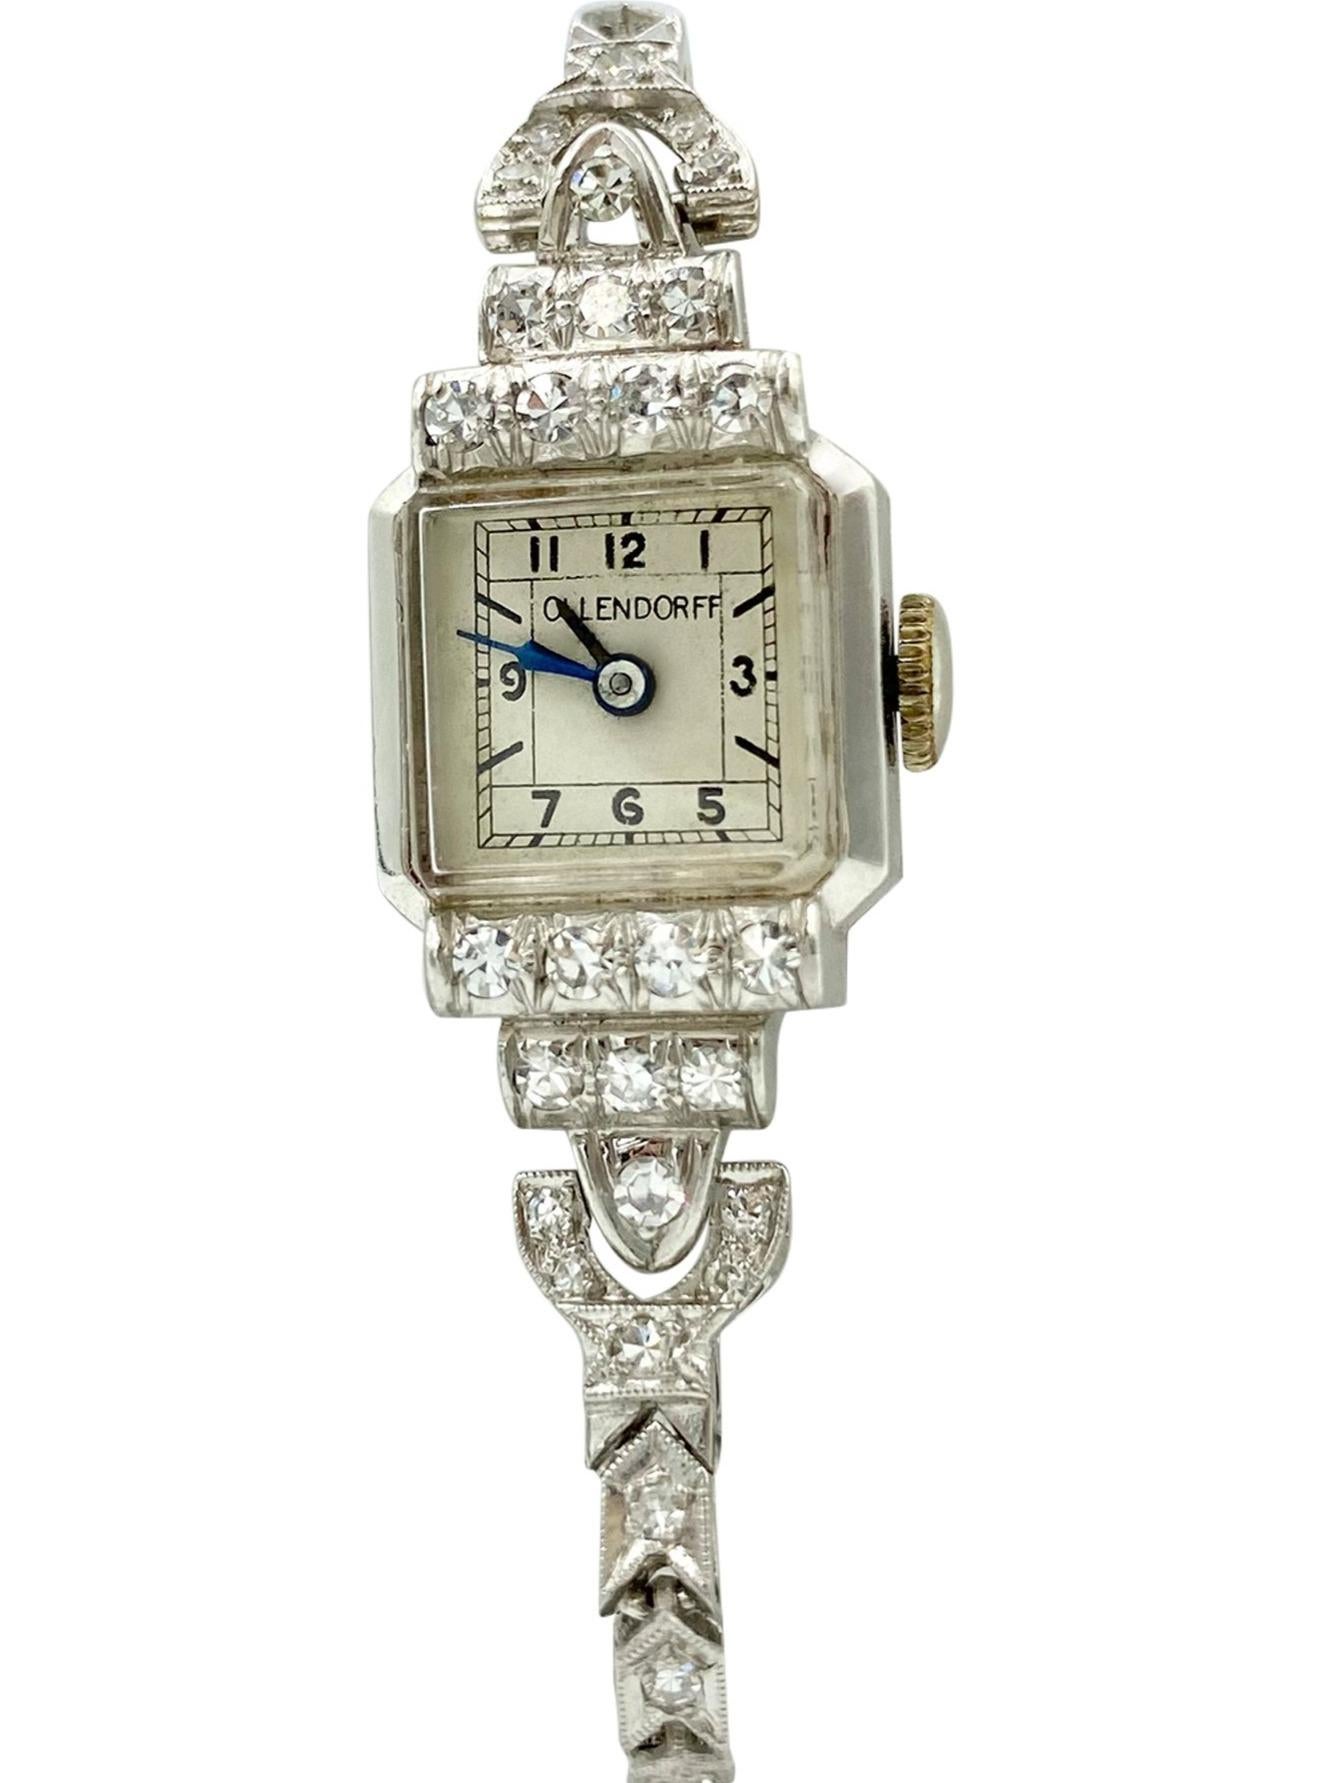 This is a WOW, WOW... WOW!!!

Absolutely stunning Art Deco platinum and diamond Swiss-made, spring-wound wristwatch by Ollendorff circa the late 1920s! It's not just a timepiece, it's a gorgeous, luxurious and hand-crafted piece of historical fine